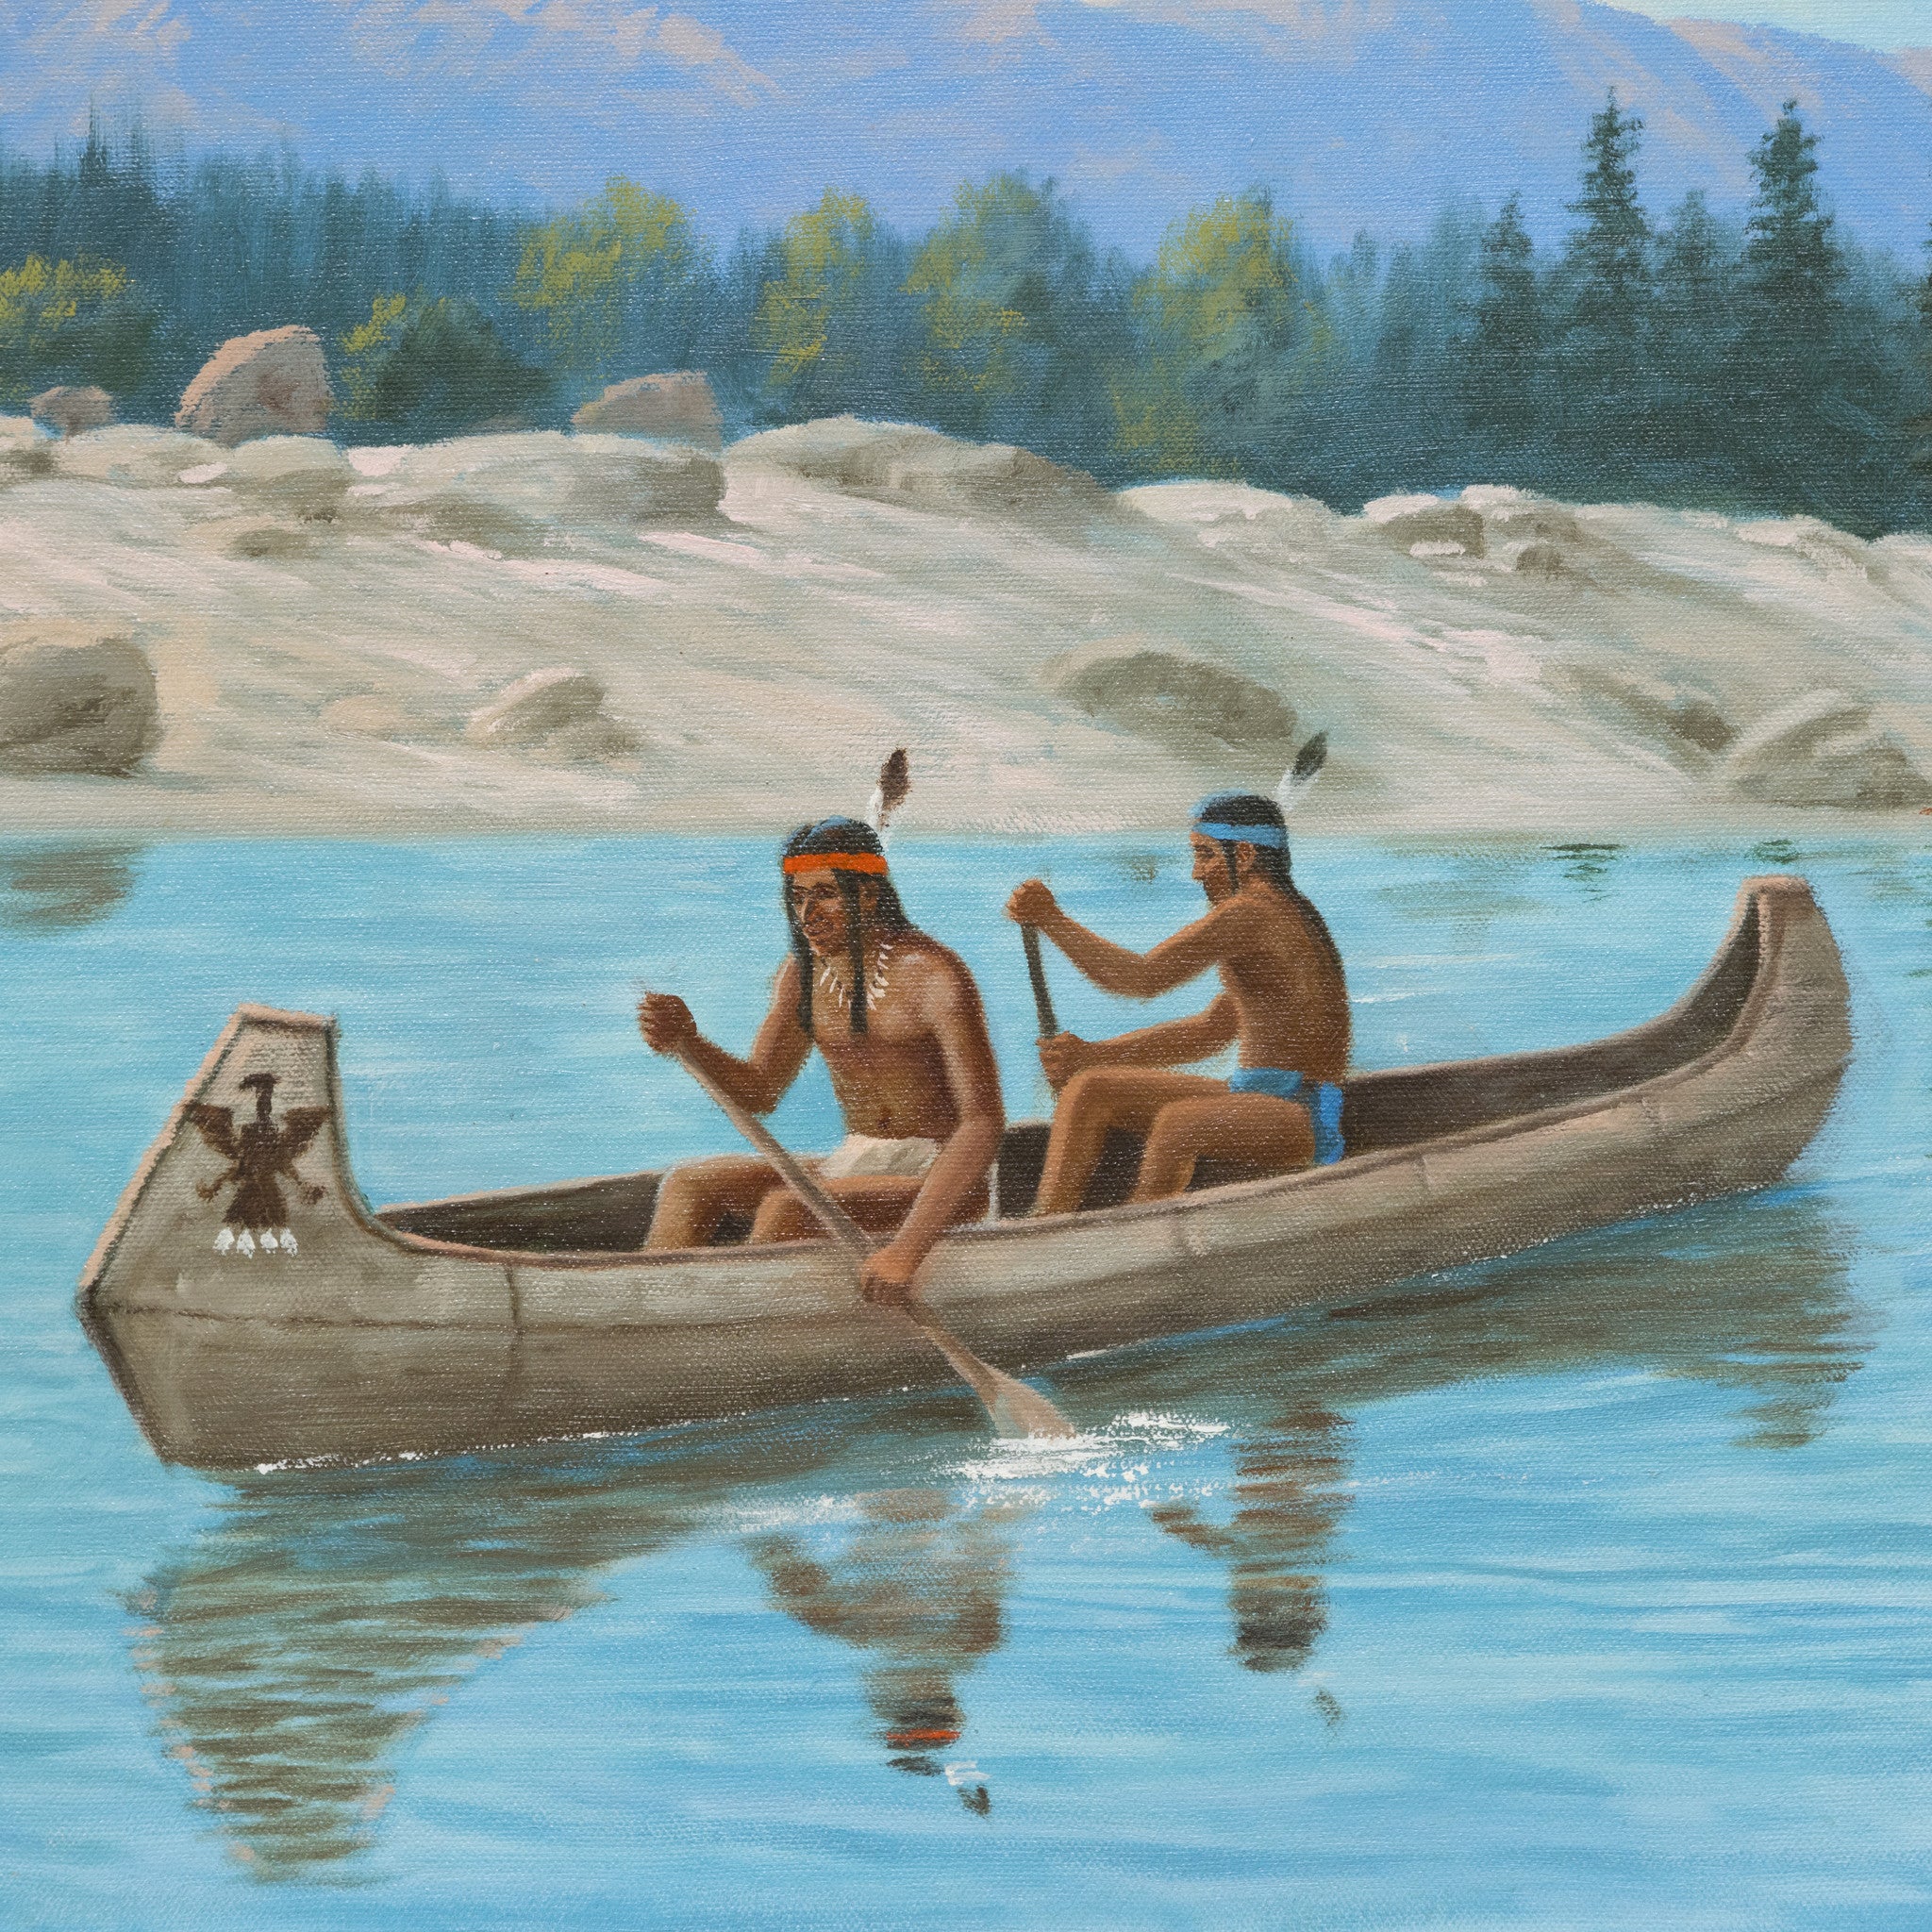 Native Americans in Canoe by Charles Damrow